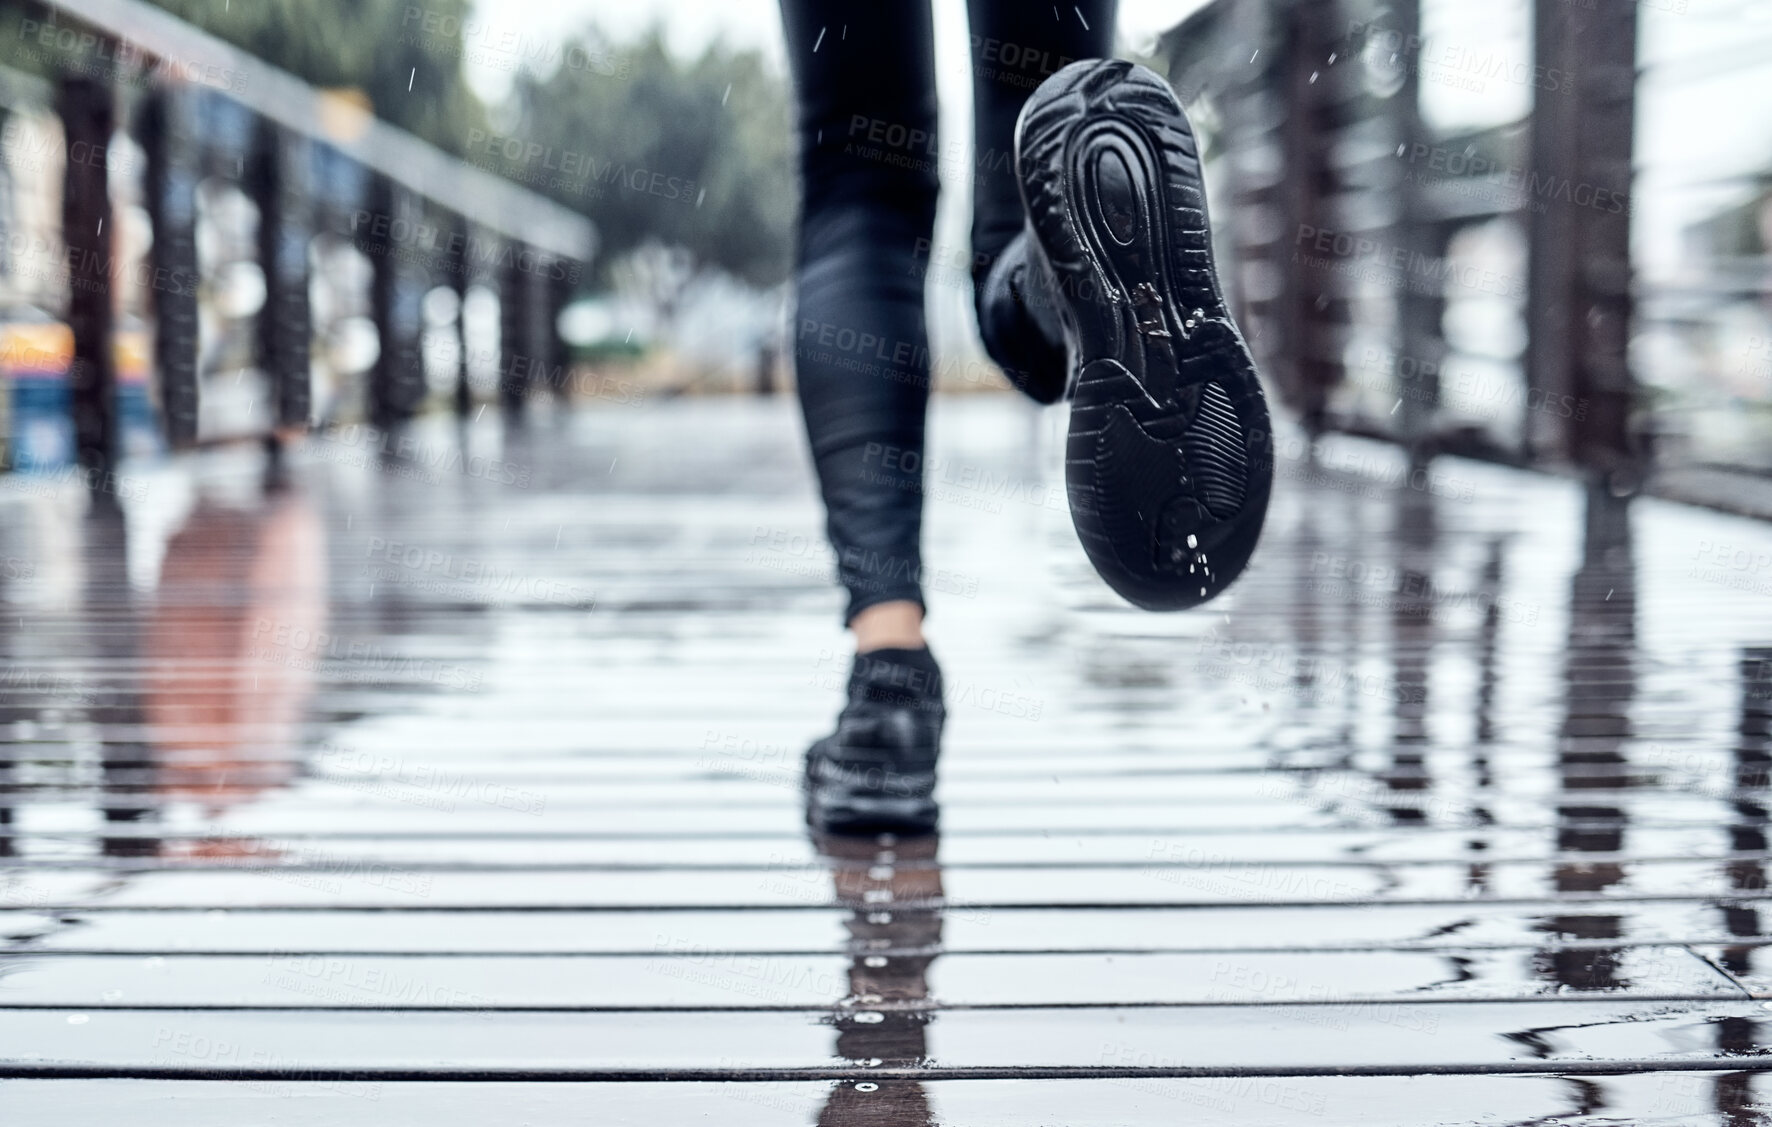 Buy stock photo Runner training in the rain, person doing workout and outdoor cardio for marathon race in Seattle road. Shoes splash water in puddle, step on wet ground and legs moving fast for fitness exercise